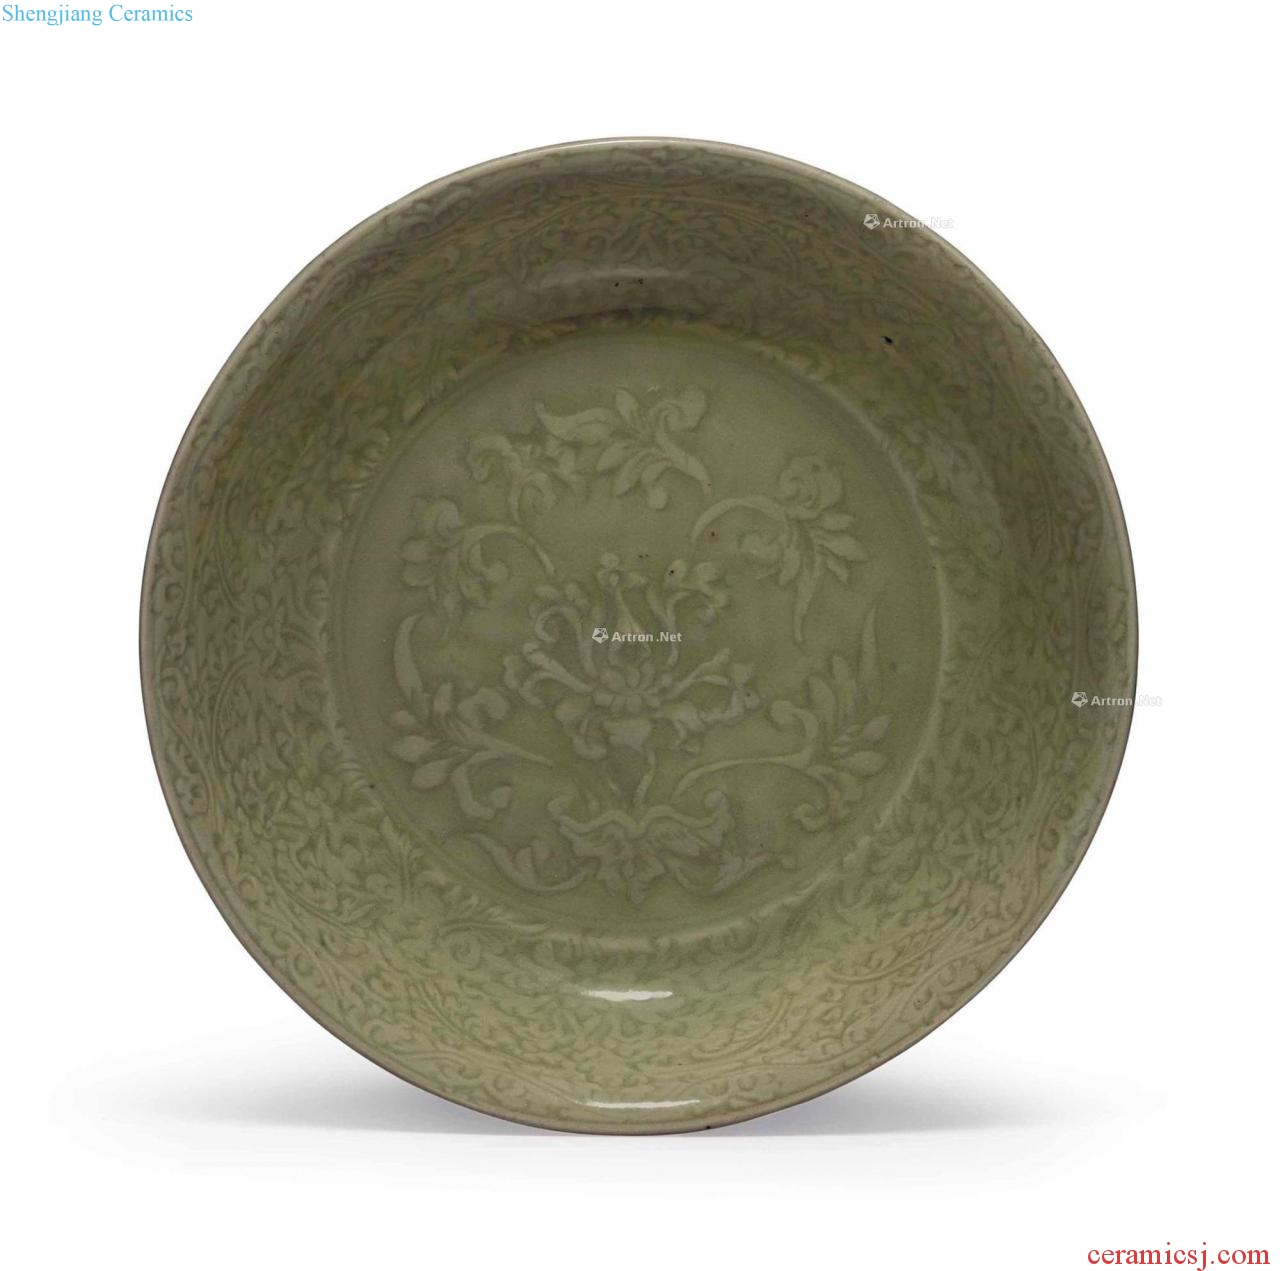 In the Ming dynasty, in the 15th century A RARE FINELY CARVED LONGQUAN CELADON DISH